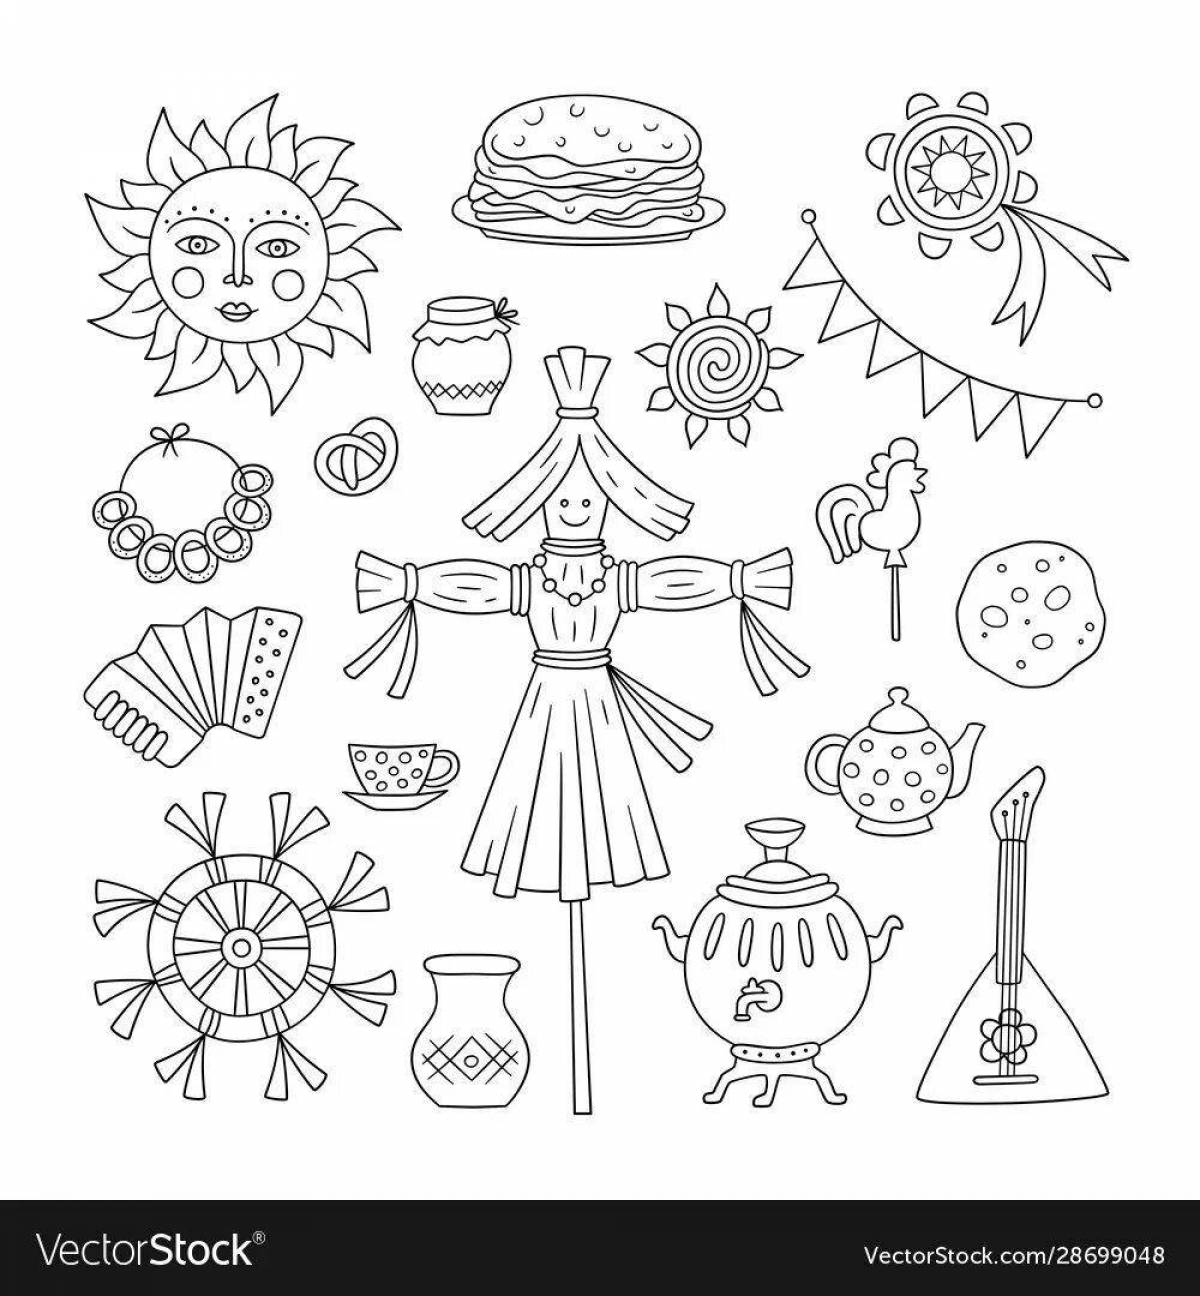 Fairy Shrovetide scarecrow coloring page